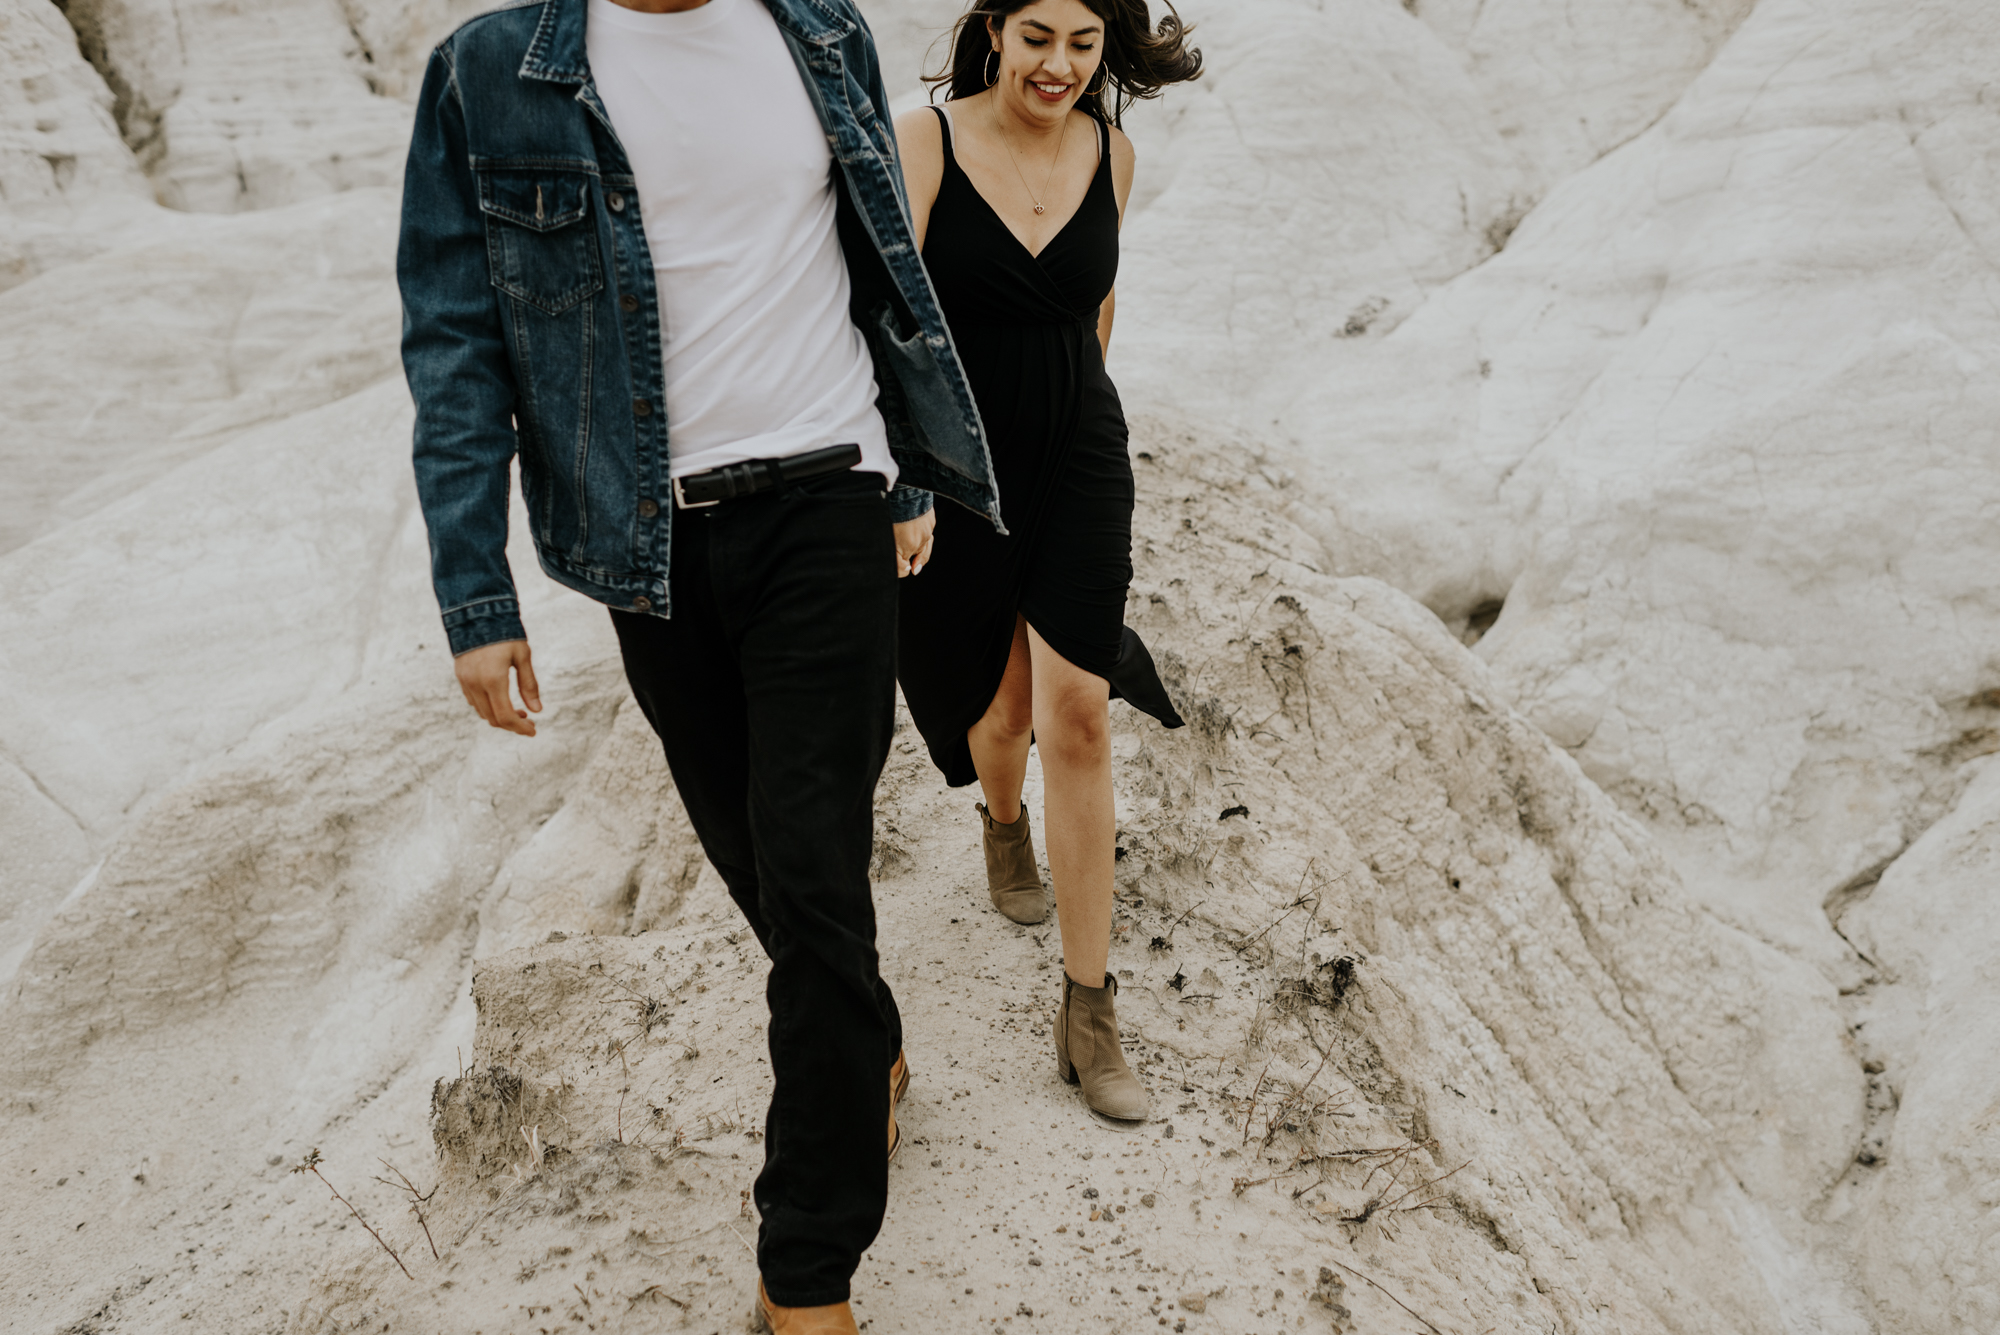 Adventurous Engagement Session at the Paint Mines in Colorado